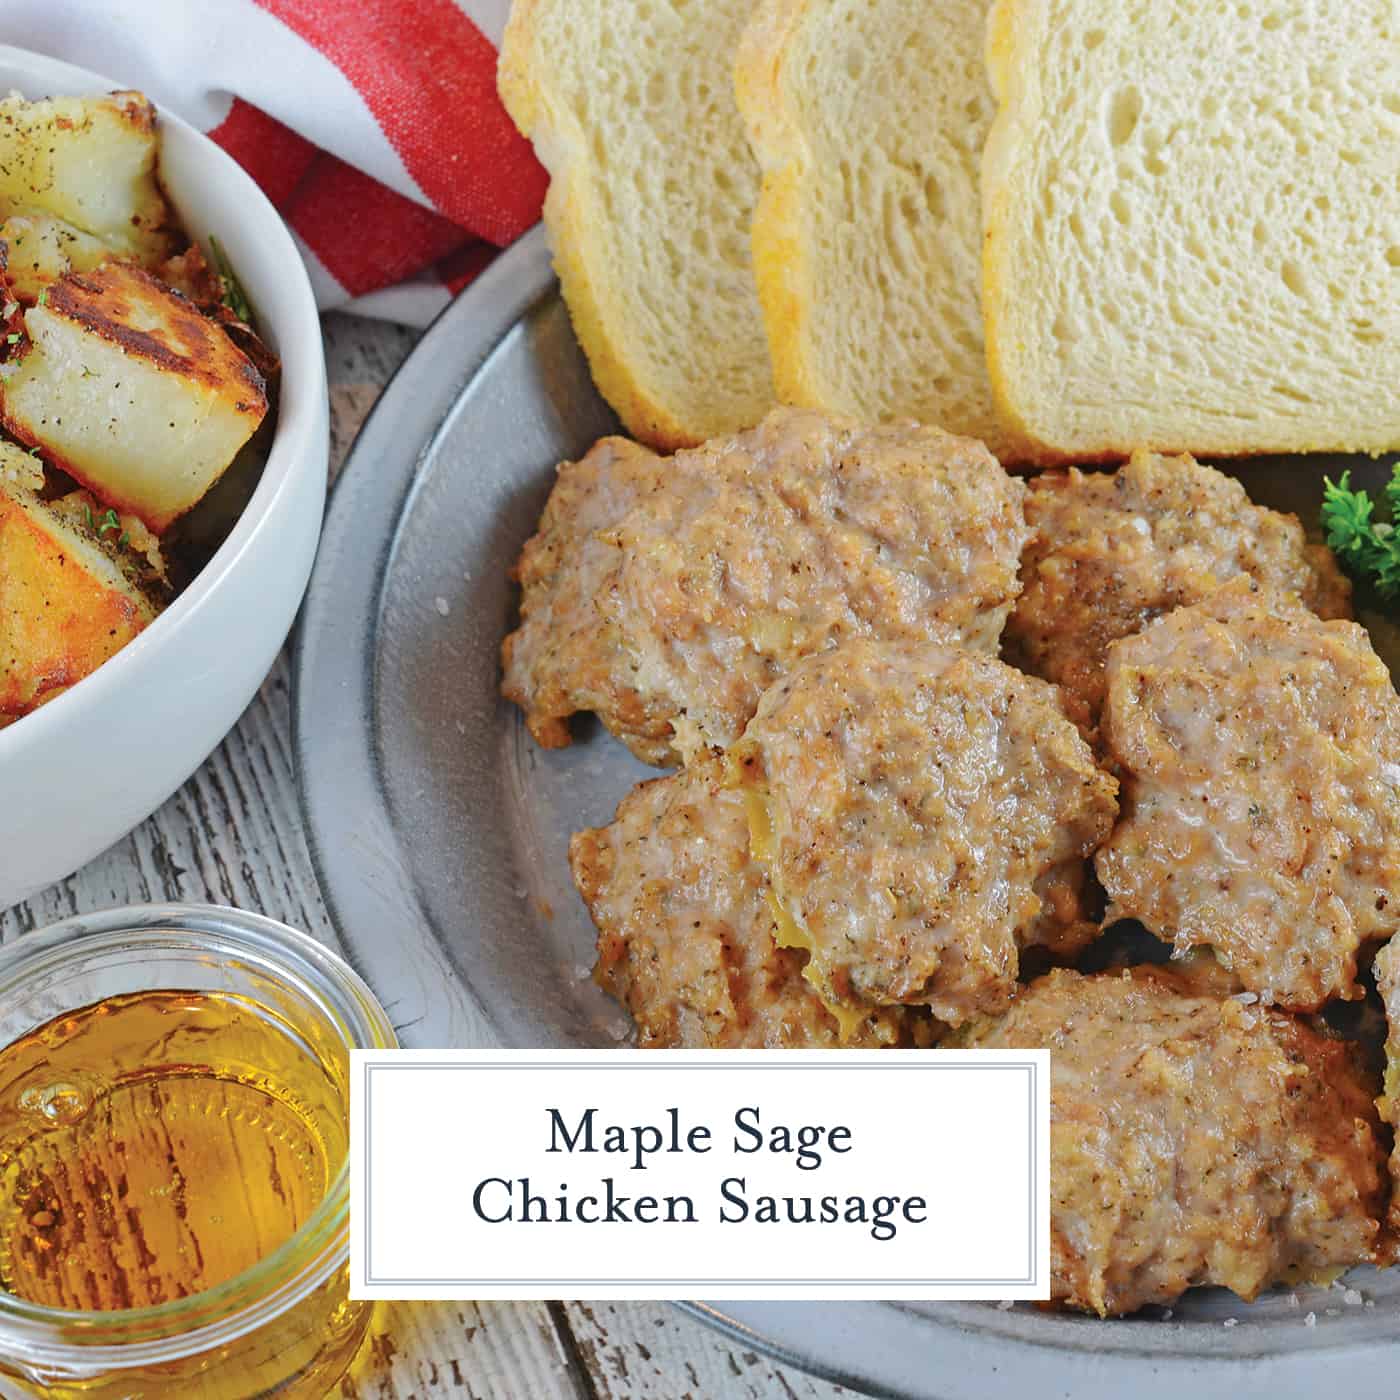 Maple Sage Chicken Sausage is an easy breakfast sausage recipe using a savory sausage spice mix. They can be made ahead of time and frozen! #homemadesausage #breakfastsausage www.savoryexperiments.com